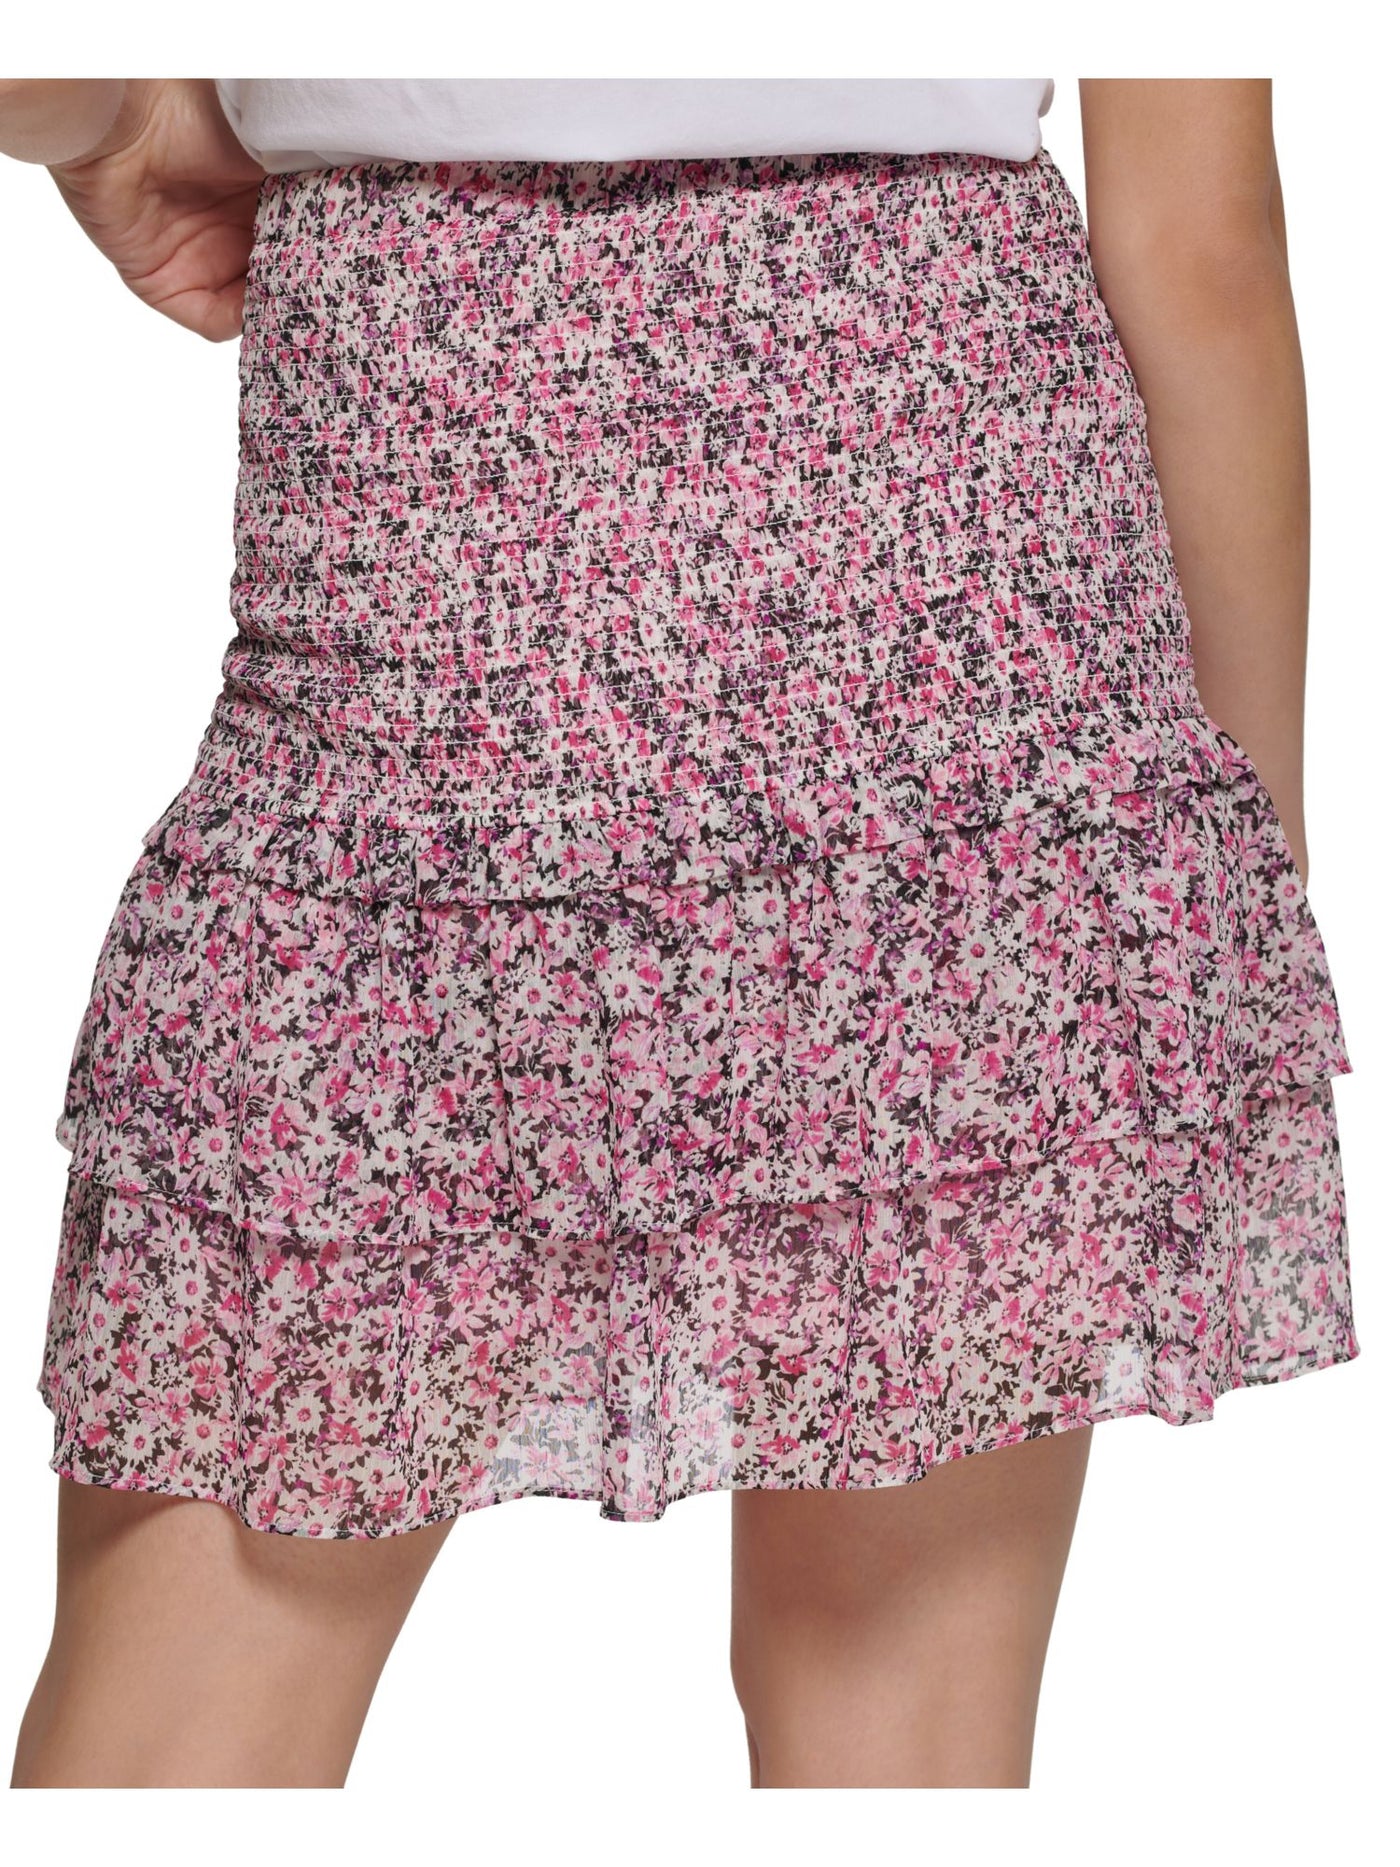 KARL LAGERFELD PARIS Womens Pink Smocked Lined Floral Short Ruffled Skirt XS